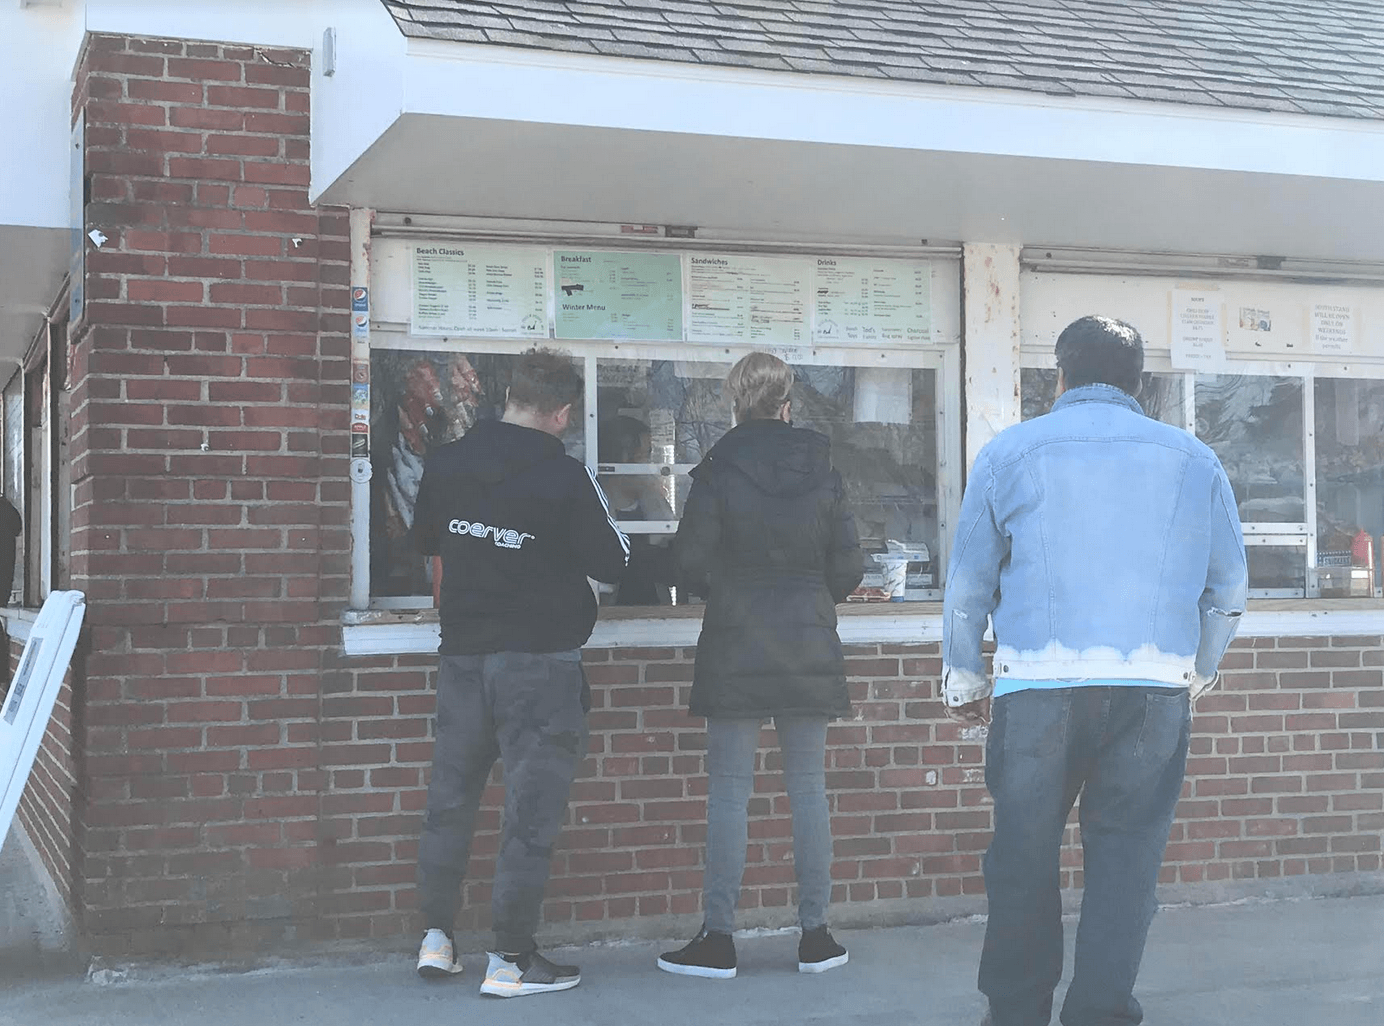 Customers attempt social distancing at the concession stand at Tod's Point. March 21, 2020 Photo: Leslie Yager